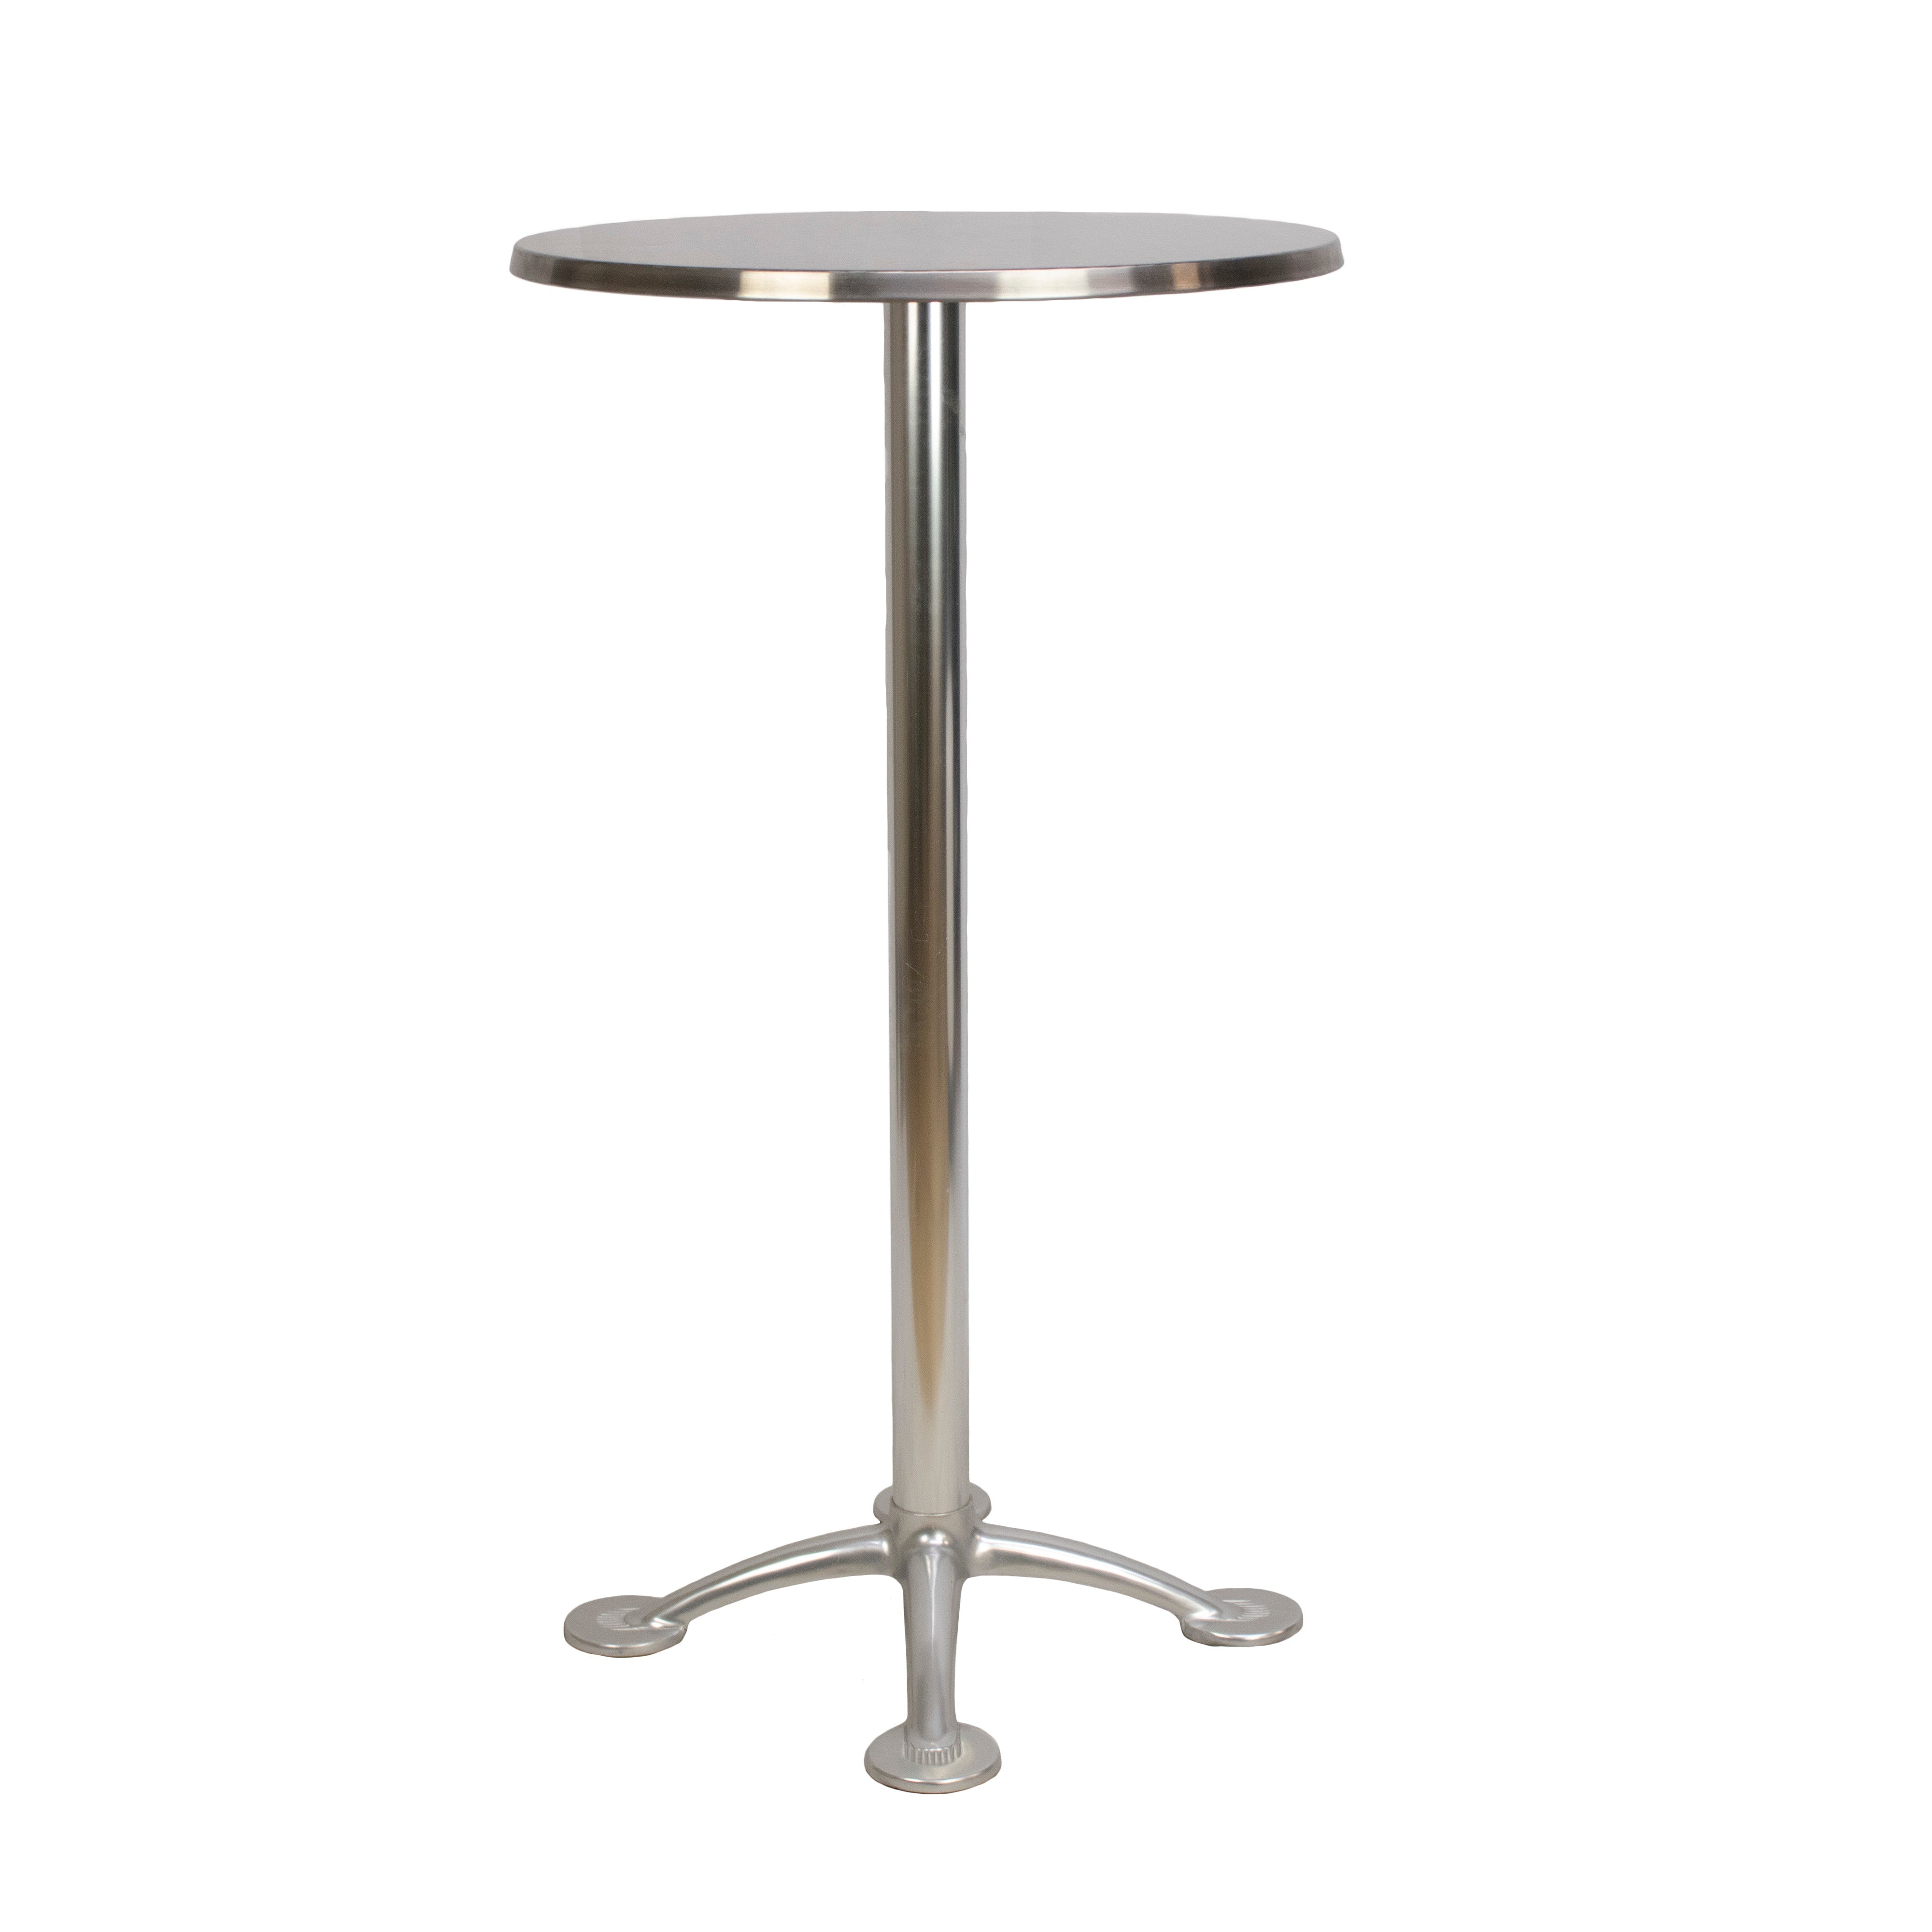 Jorge Pensi Knoll Cafe Height 23" Table - Preowned